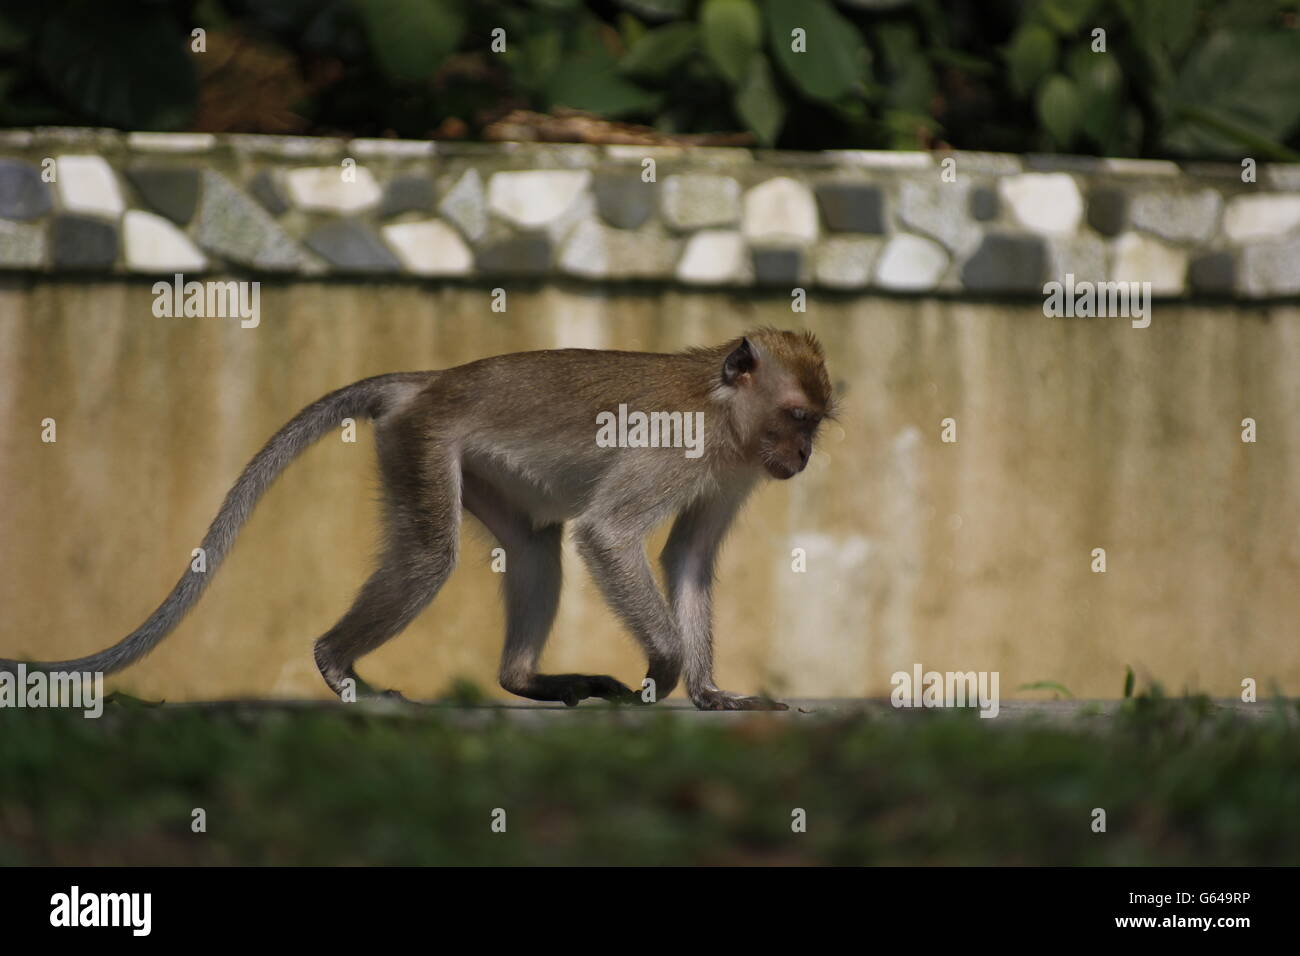 monkey with long tail Stock Photo